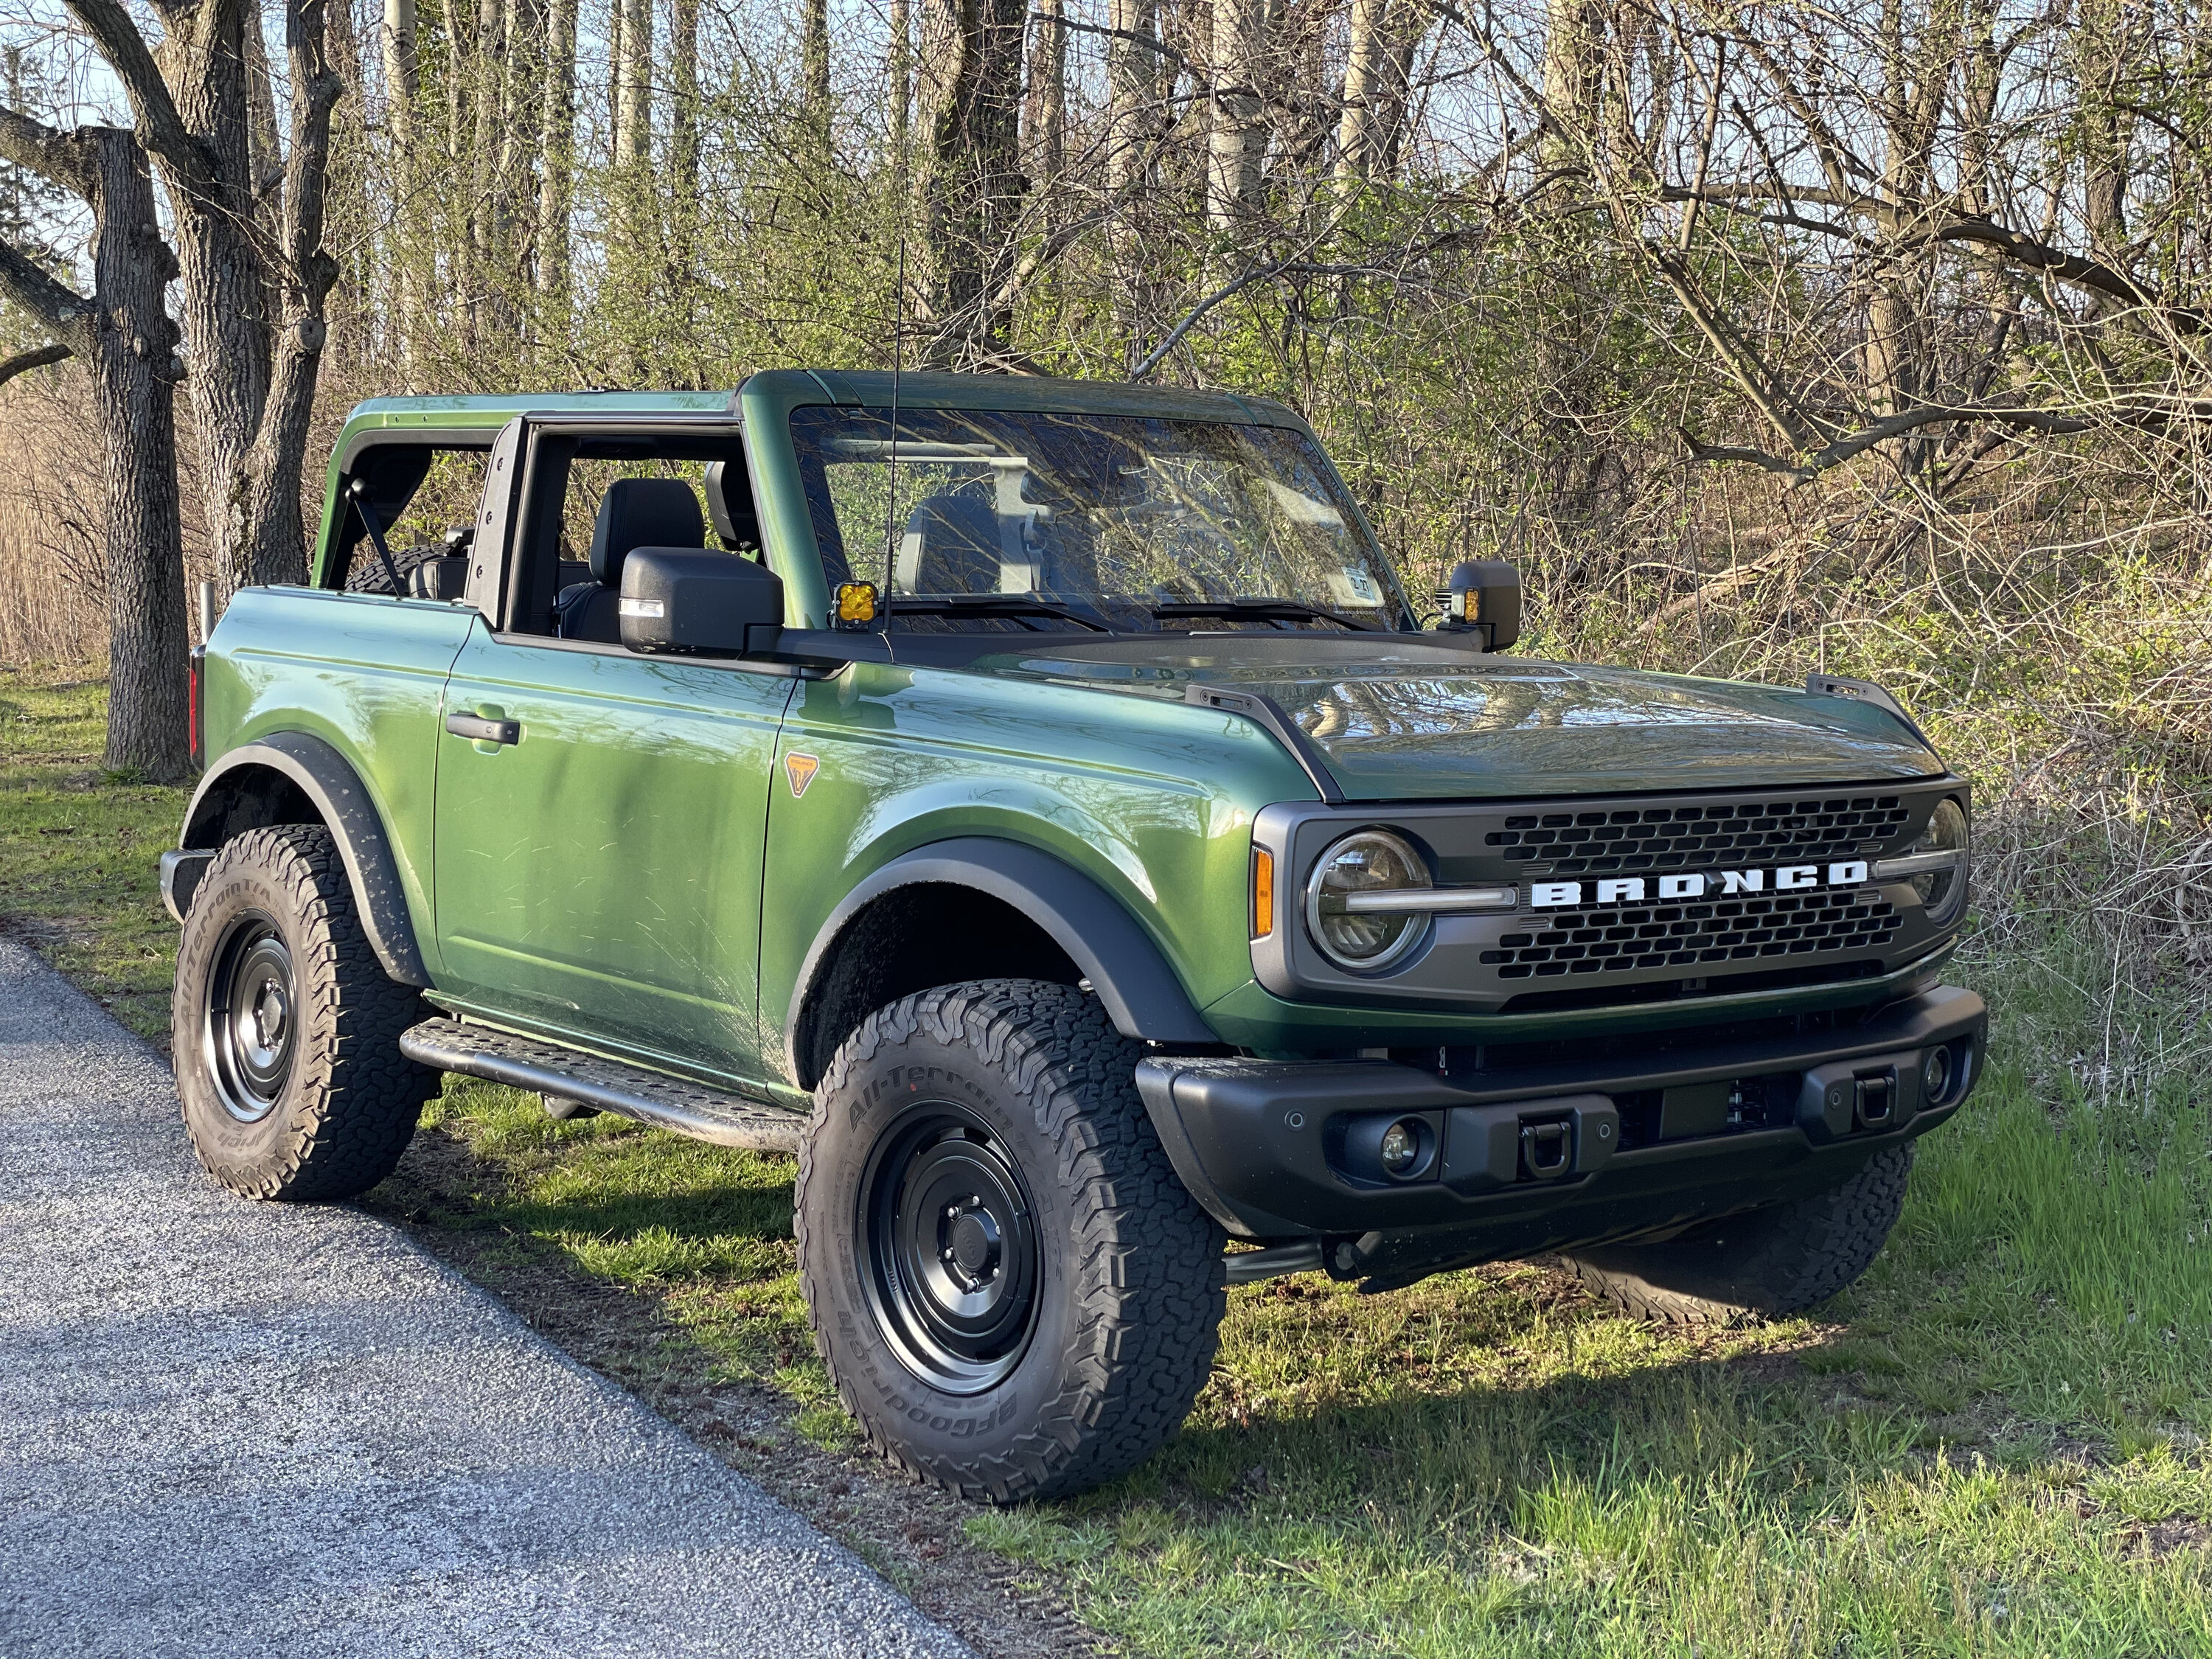 Ford Bronco Show 33's some love picture thread 5564E351-3B50-4592-AF7F-CDE3C4F798C5